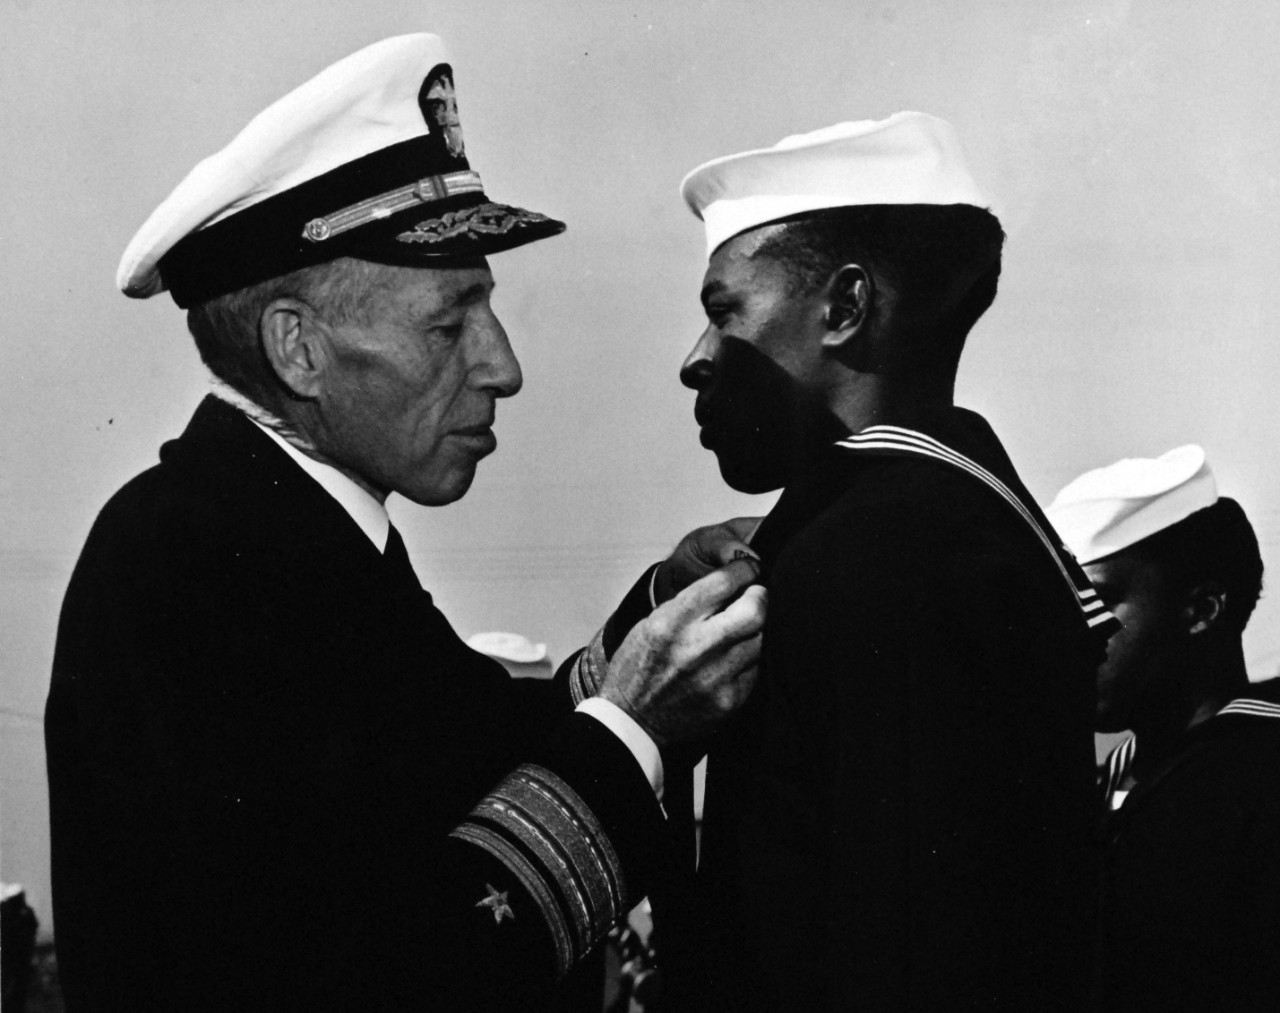 80-G-47280:  Seaman First Class William E. Anderson, USNR, 1944.  Rear Admiral Carleton H. Wright presenting the Navy and Marine Corps Medal to Seaman First Class William E. Anderson, USNR.  Received the medal for risking his life to bring flames under control during the Port Chicago Magazine, California, explosion and fire.    Photograph filed December 9, 1944. Official U.S. Navy photograph, now in the collections of the National Archives.   